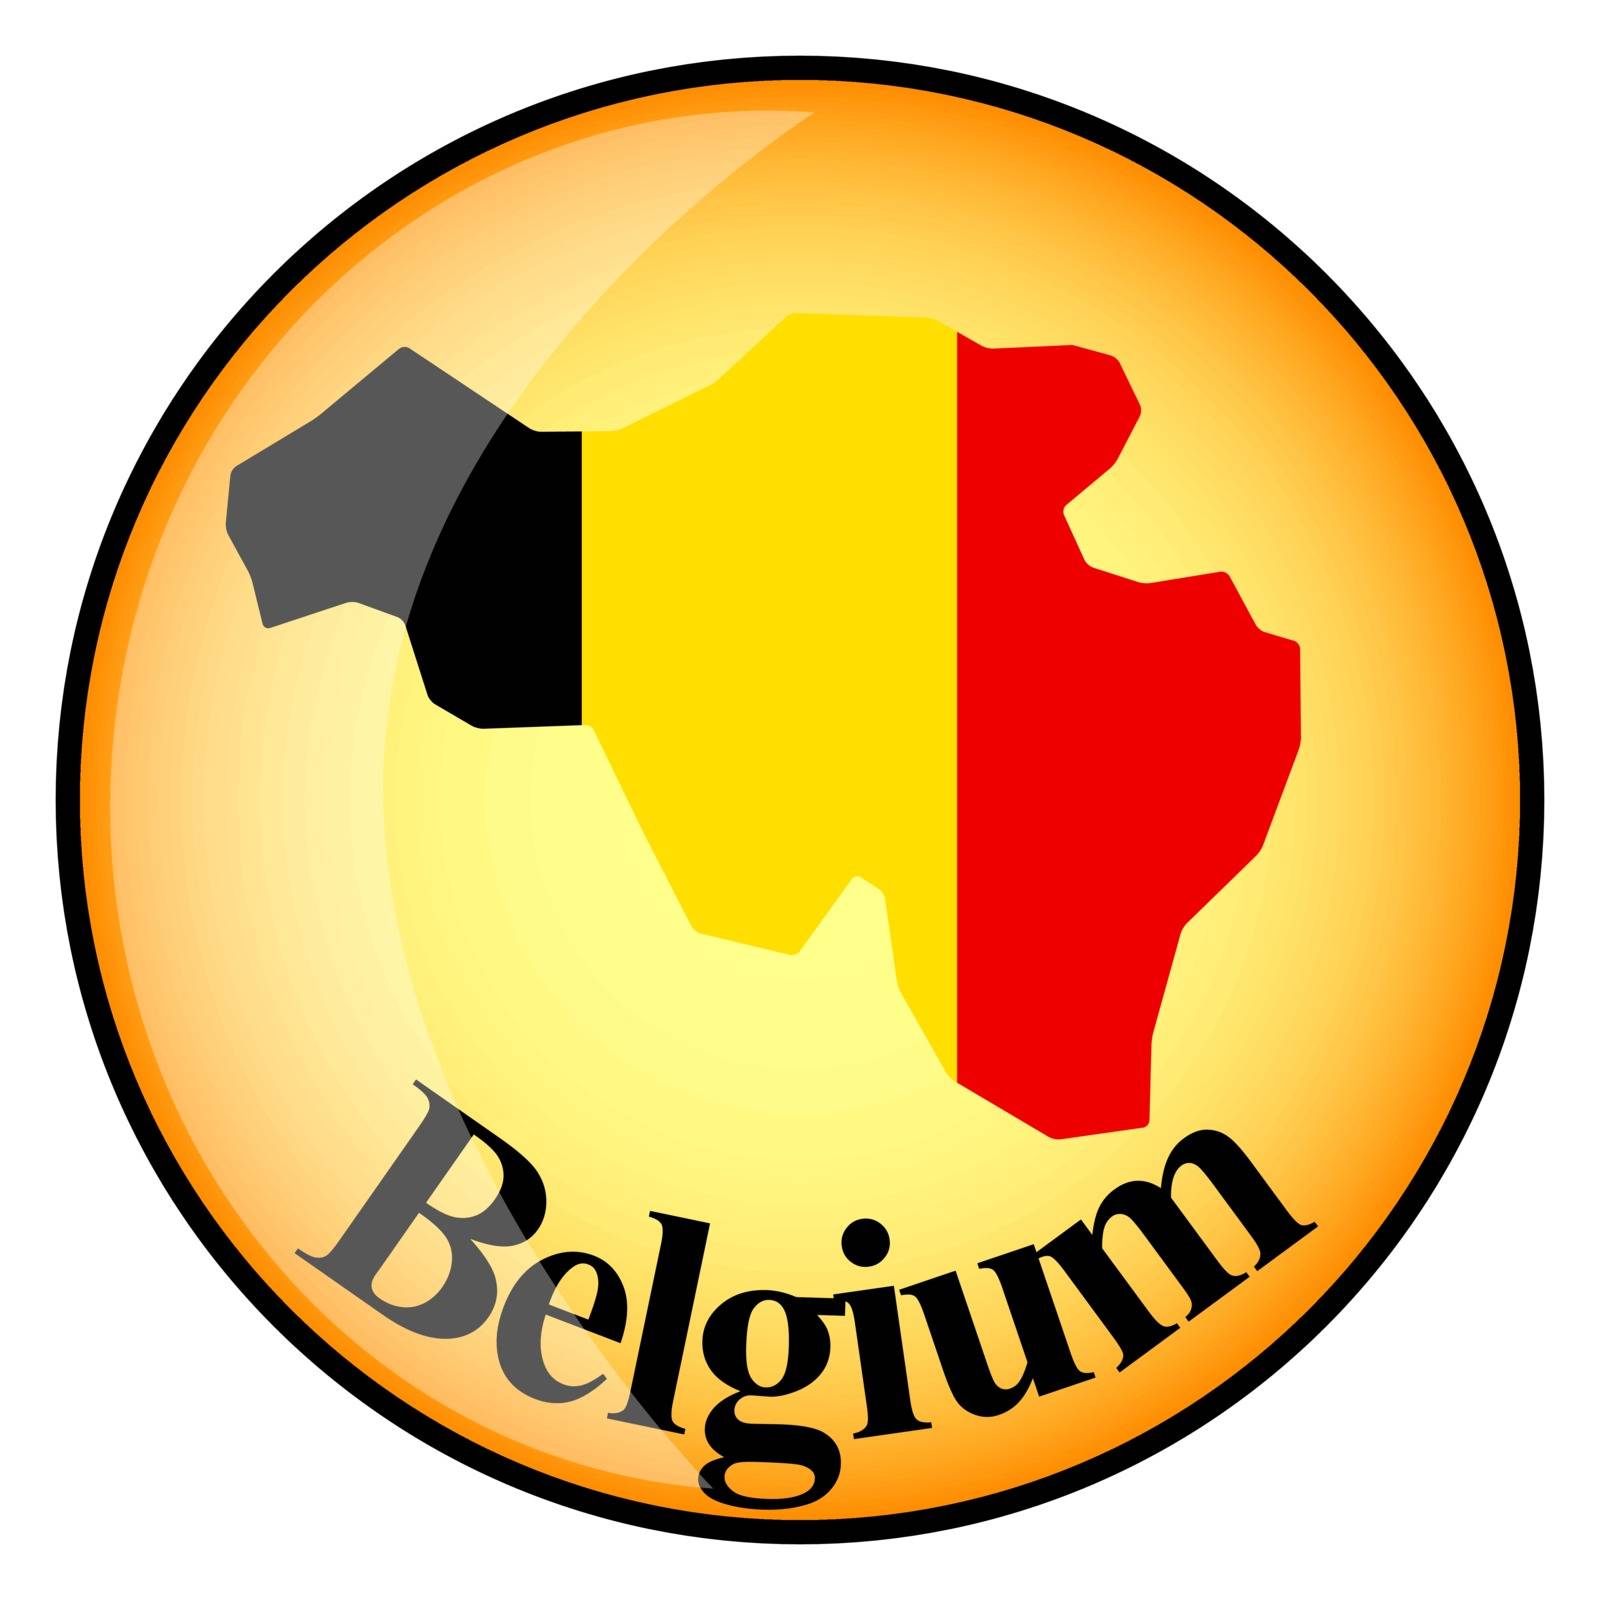 orange button with the image maps of button Belgium in the form of national flag